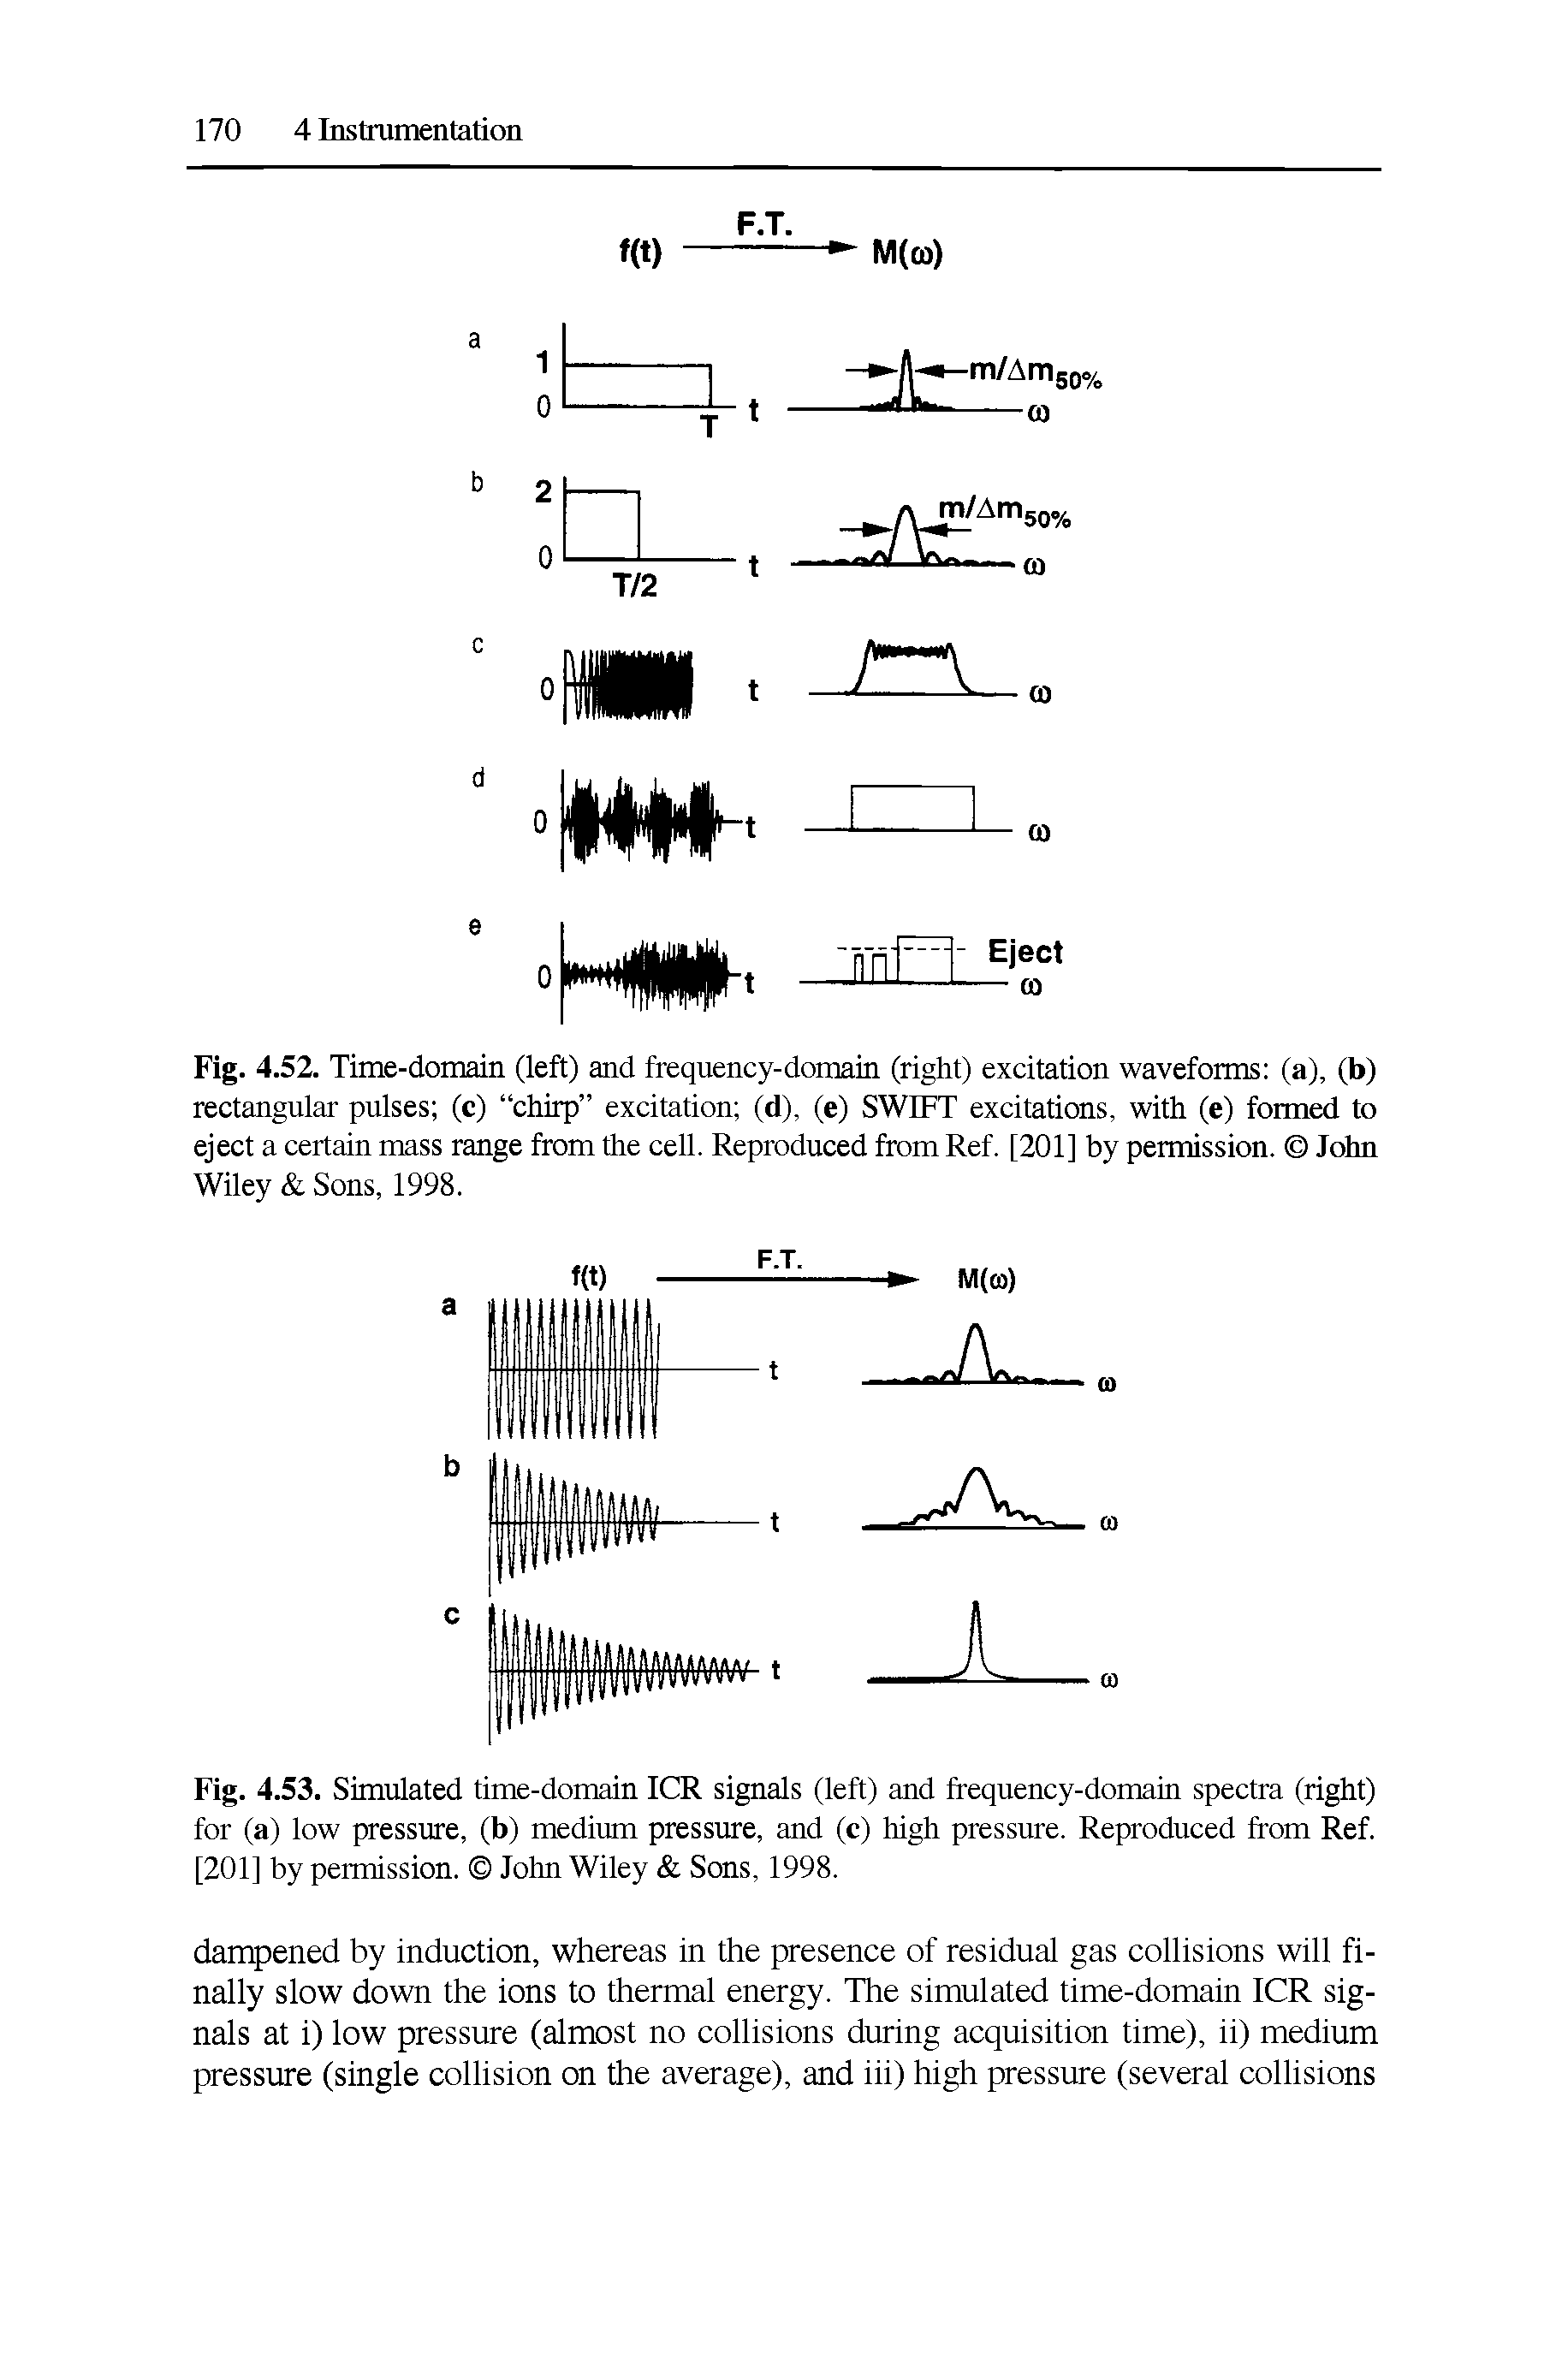 Fig. 4.53. Simulated time-domain ICR signals (left) and frequency-domain spectra (right) for (a) low pressure, (b) medium pressure, and (c) high pressure. Reproduced from Ref. [201] by permission. John Wiley Sons, 1998.